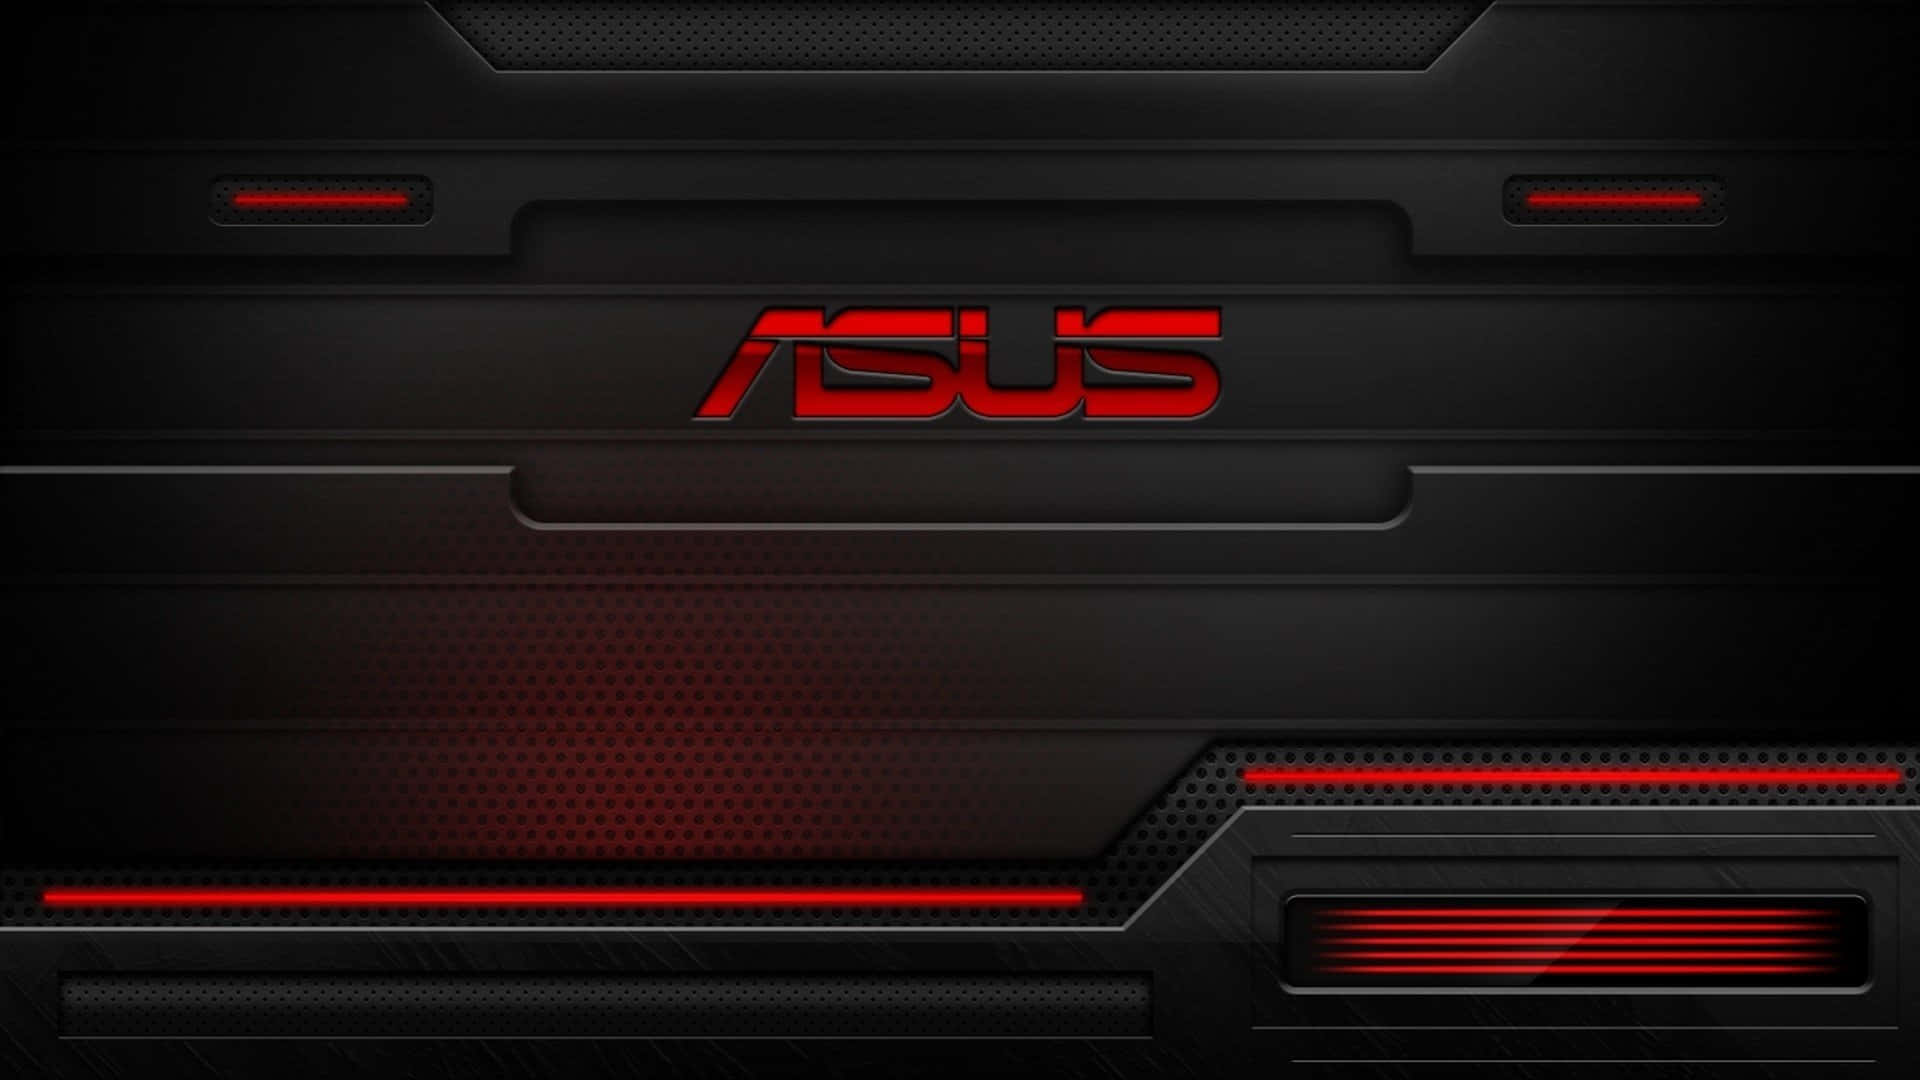 Experience High-Performance Computing with ASUS